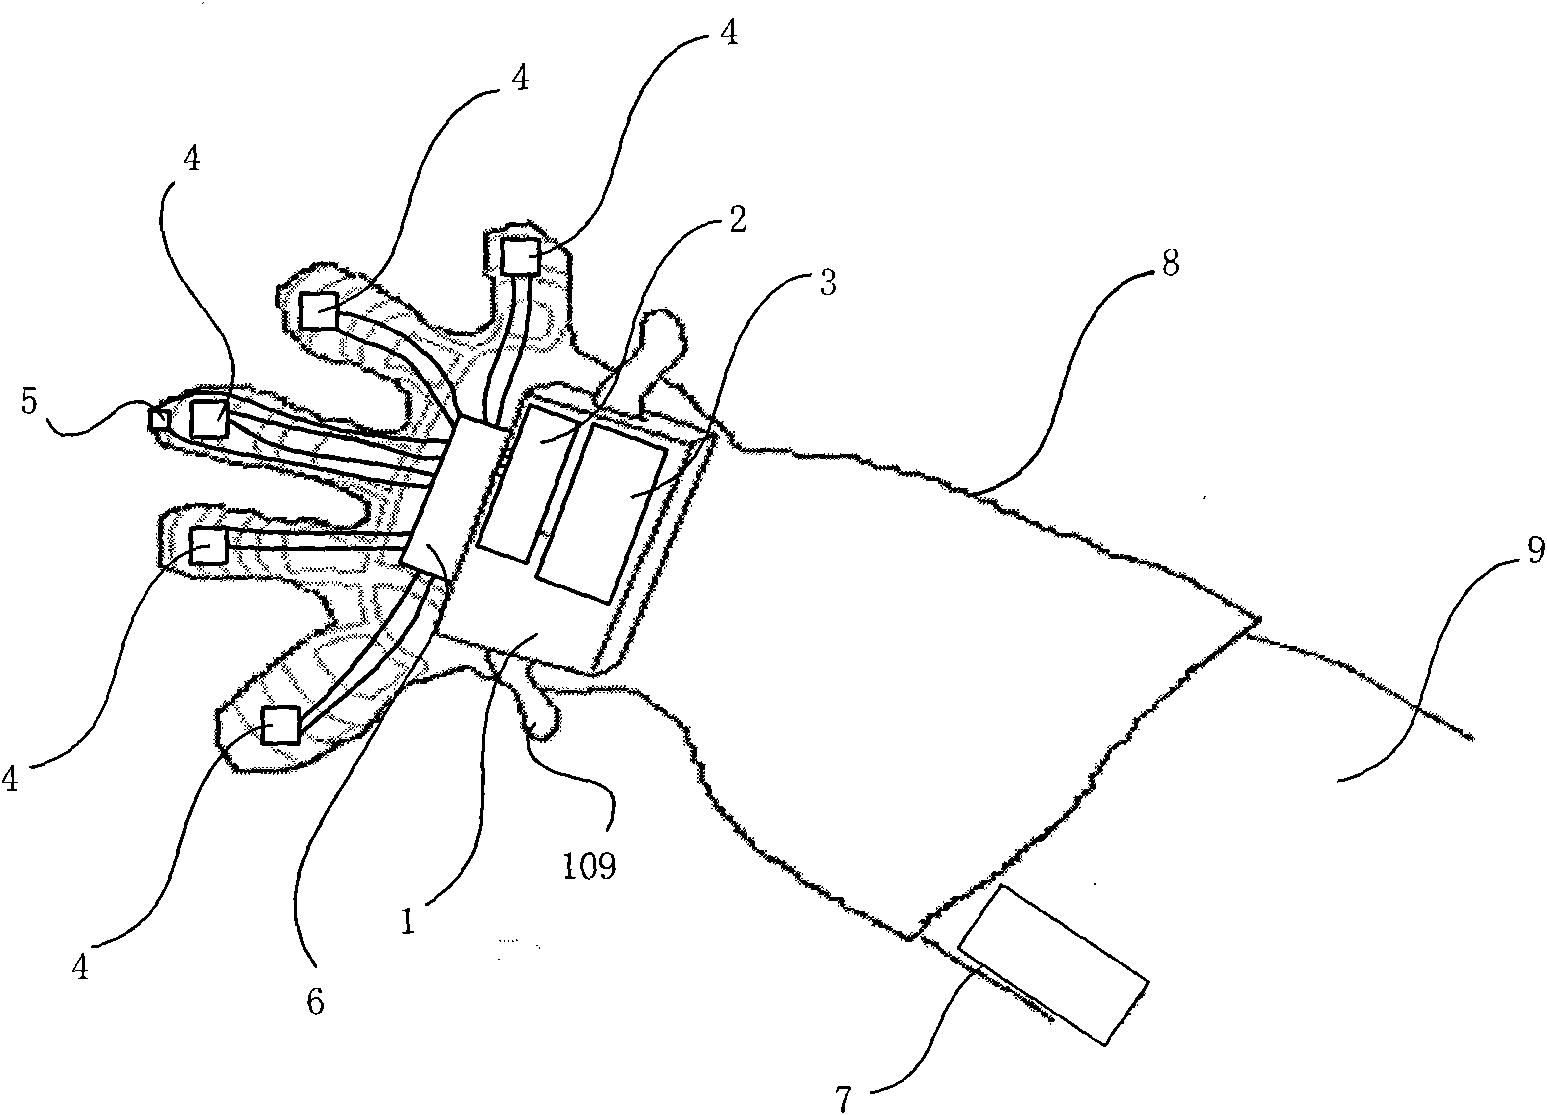 Active heating device for extravehicular space suit gloves